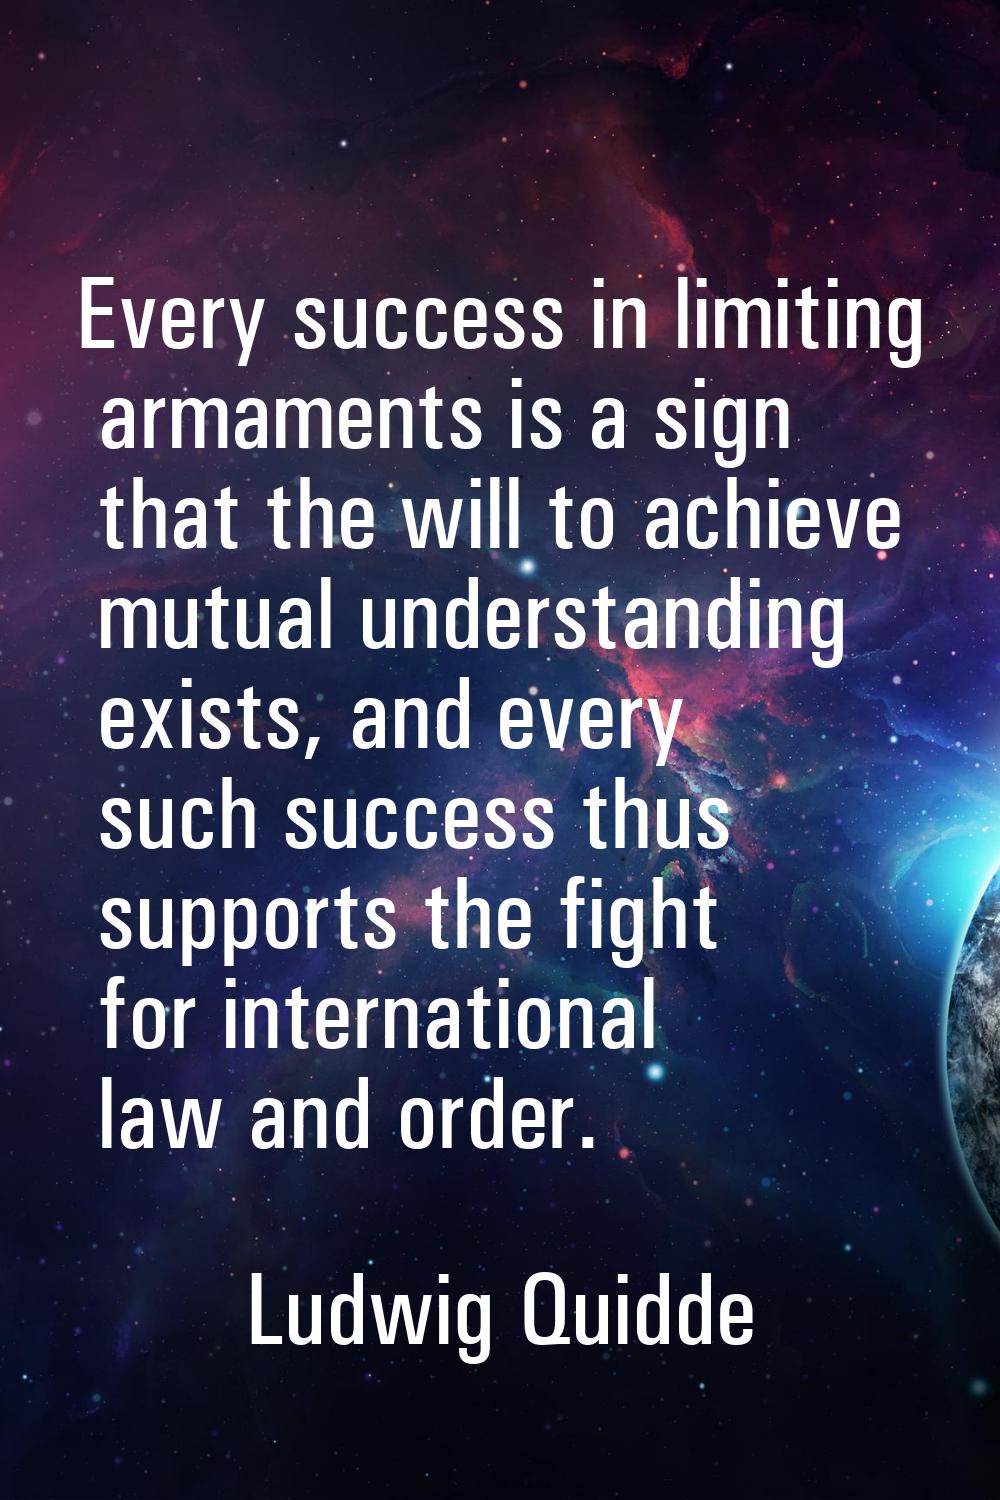 Every success in limiting armaments is a sign that the will to achieve mutual understanding exists,